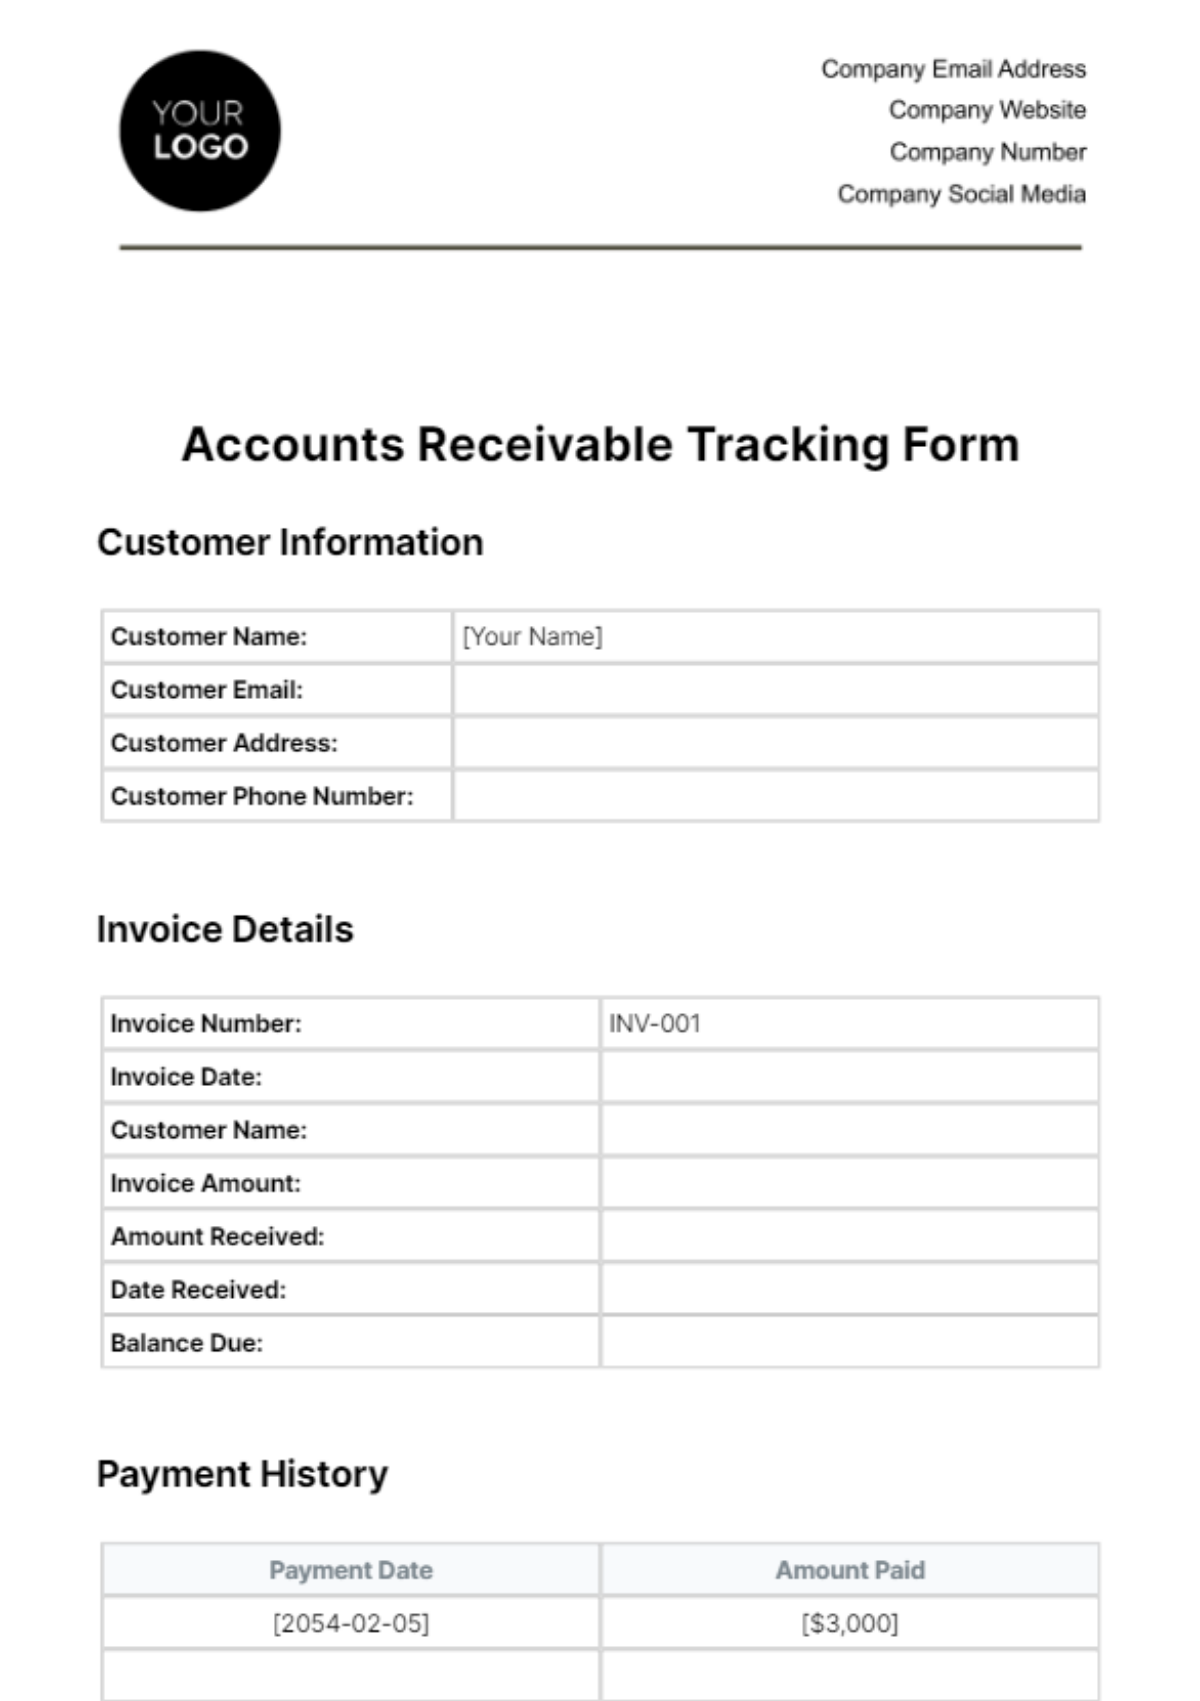 Accounts Receivable Tracking Form Template